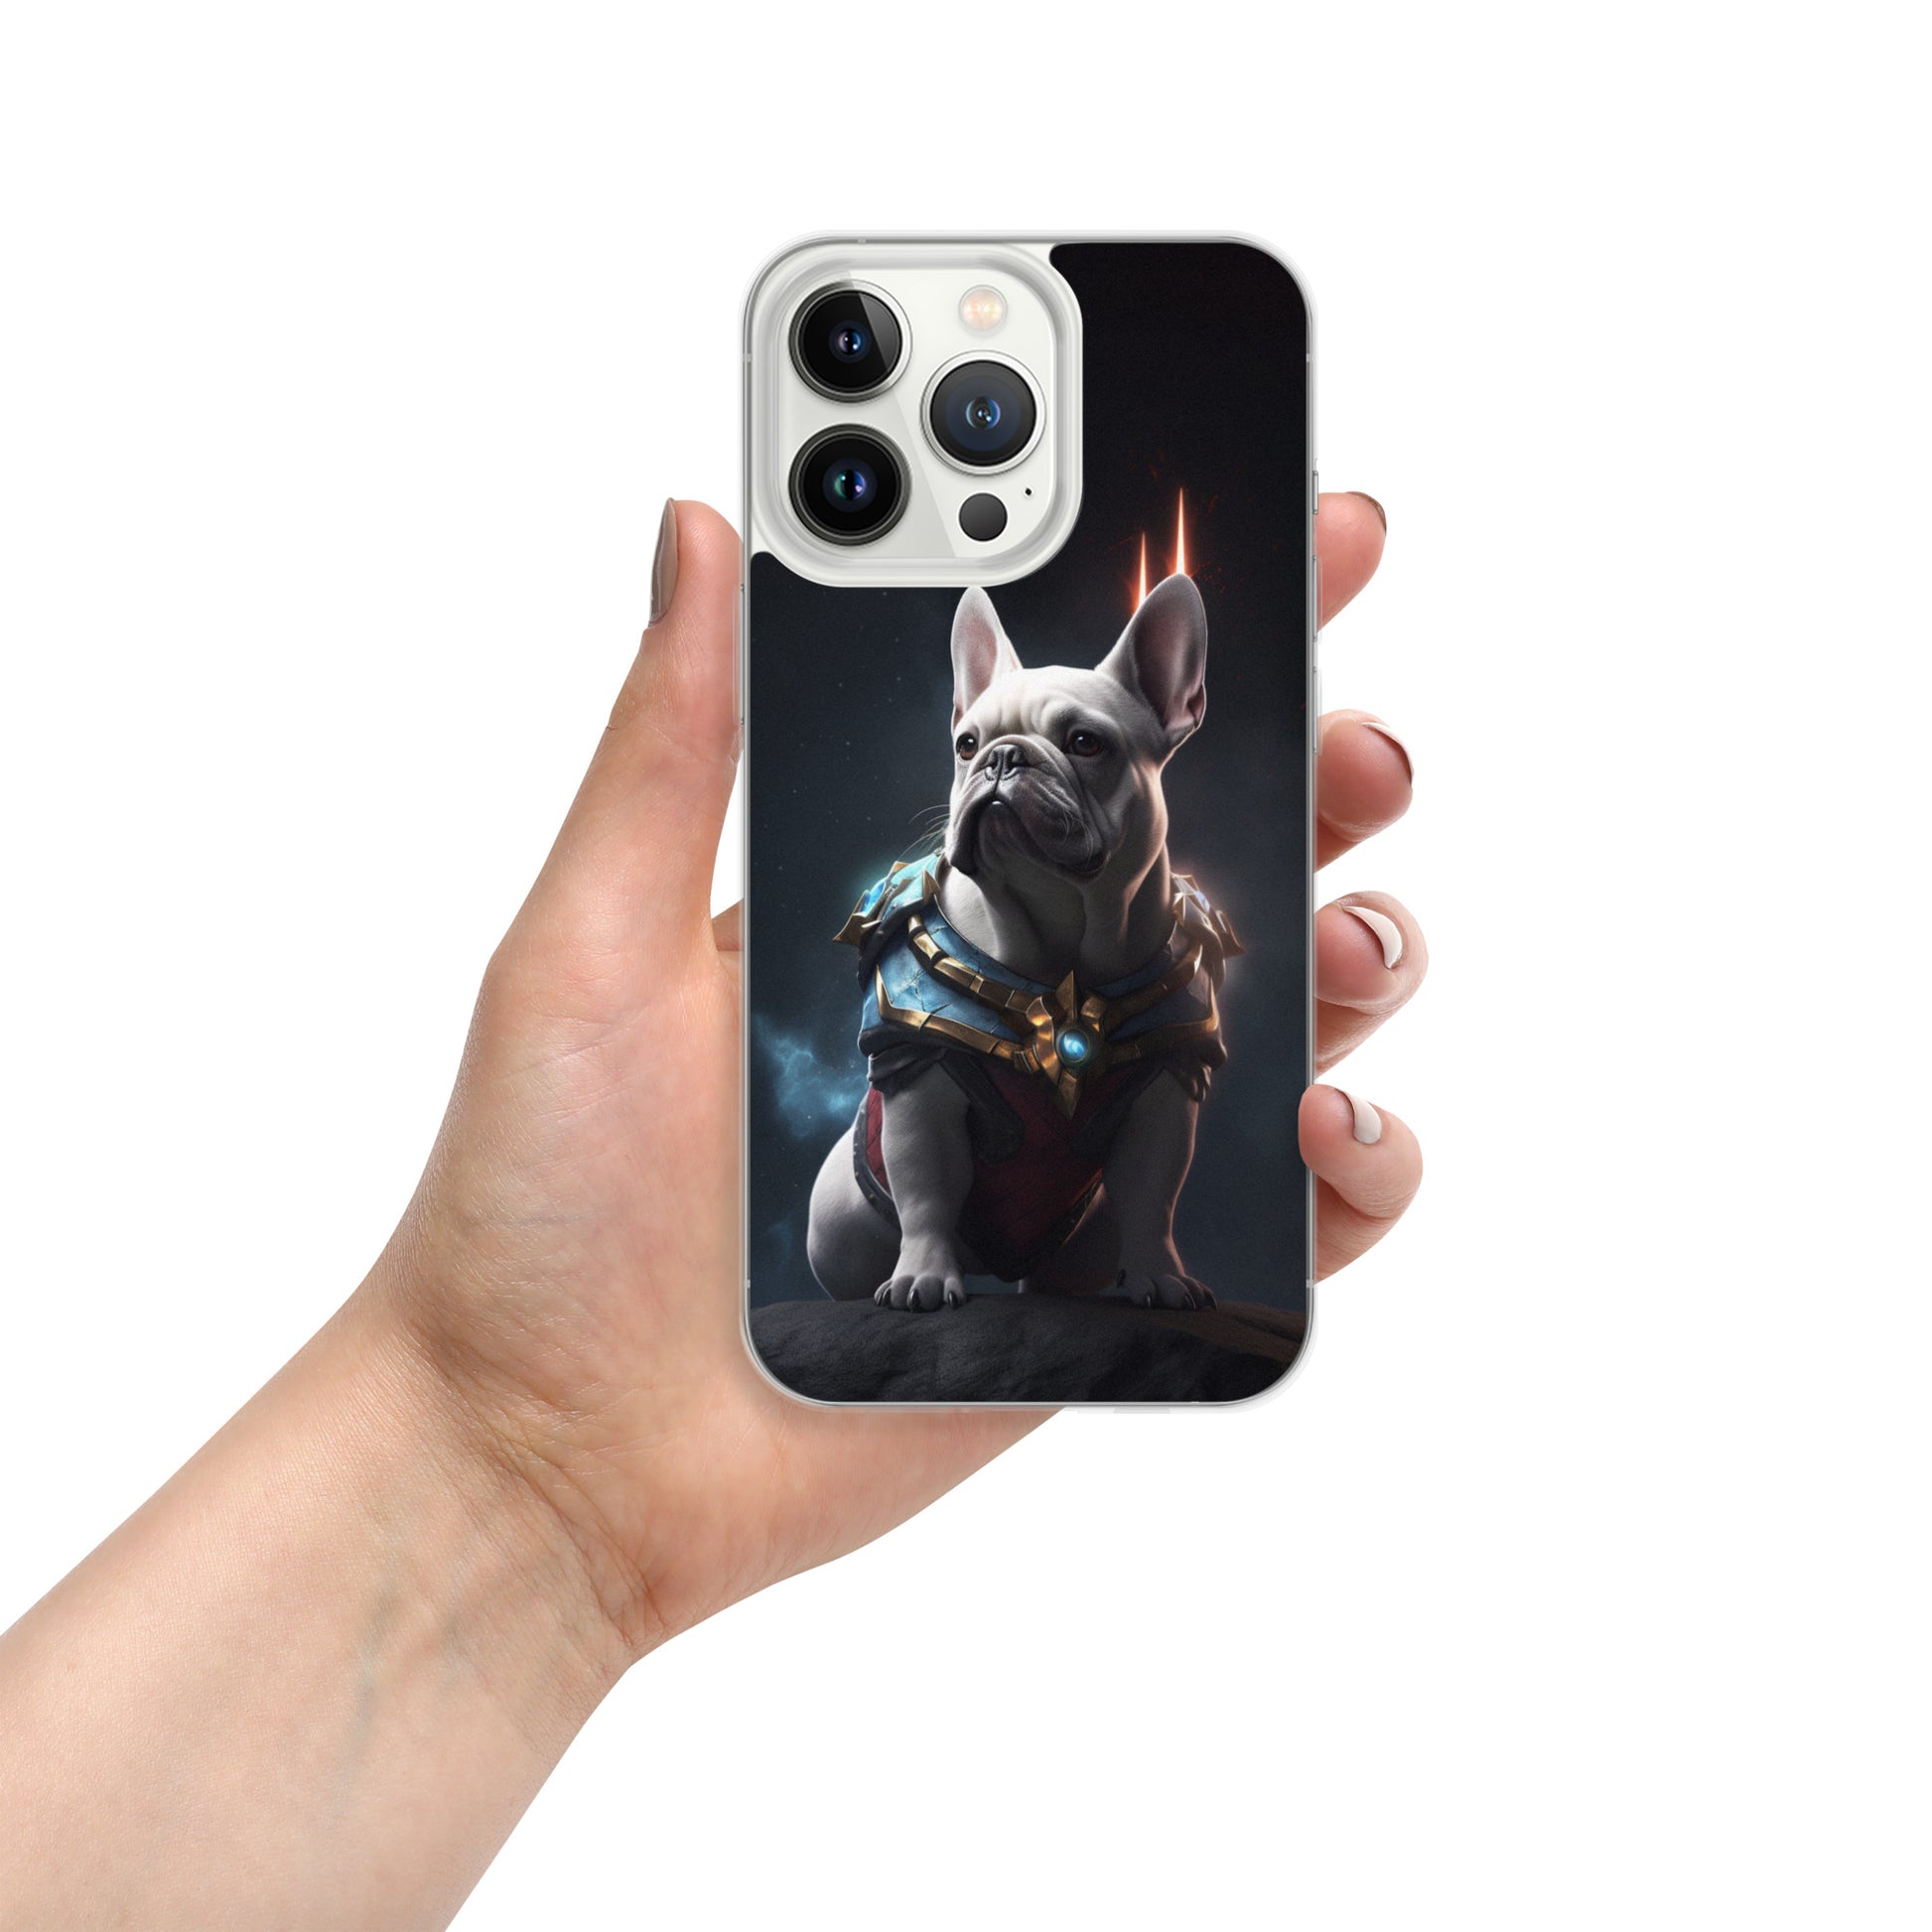 Frenchie iPhone Case - Mighty & Striking Phone Shield